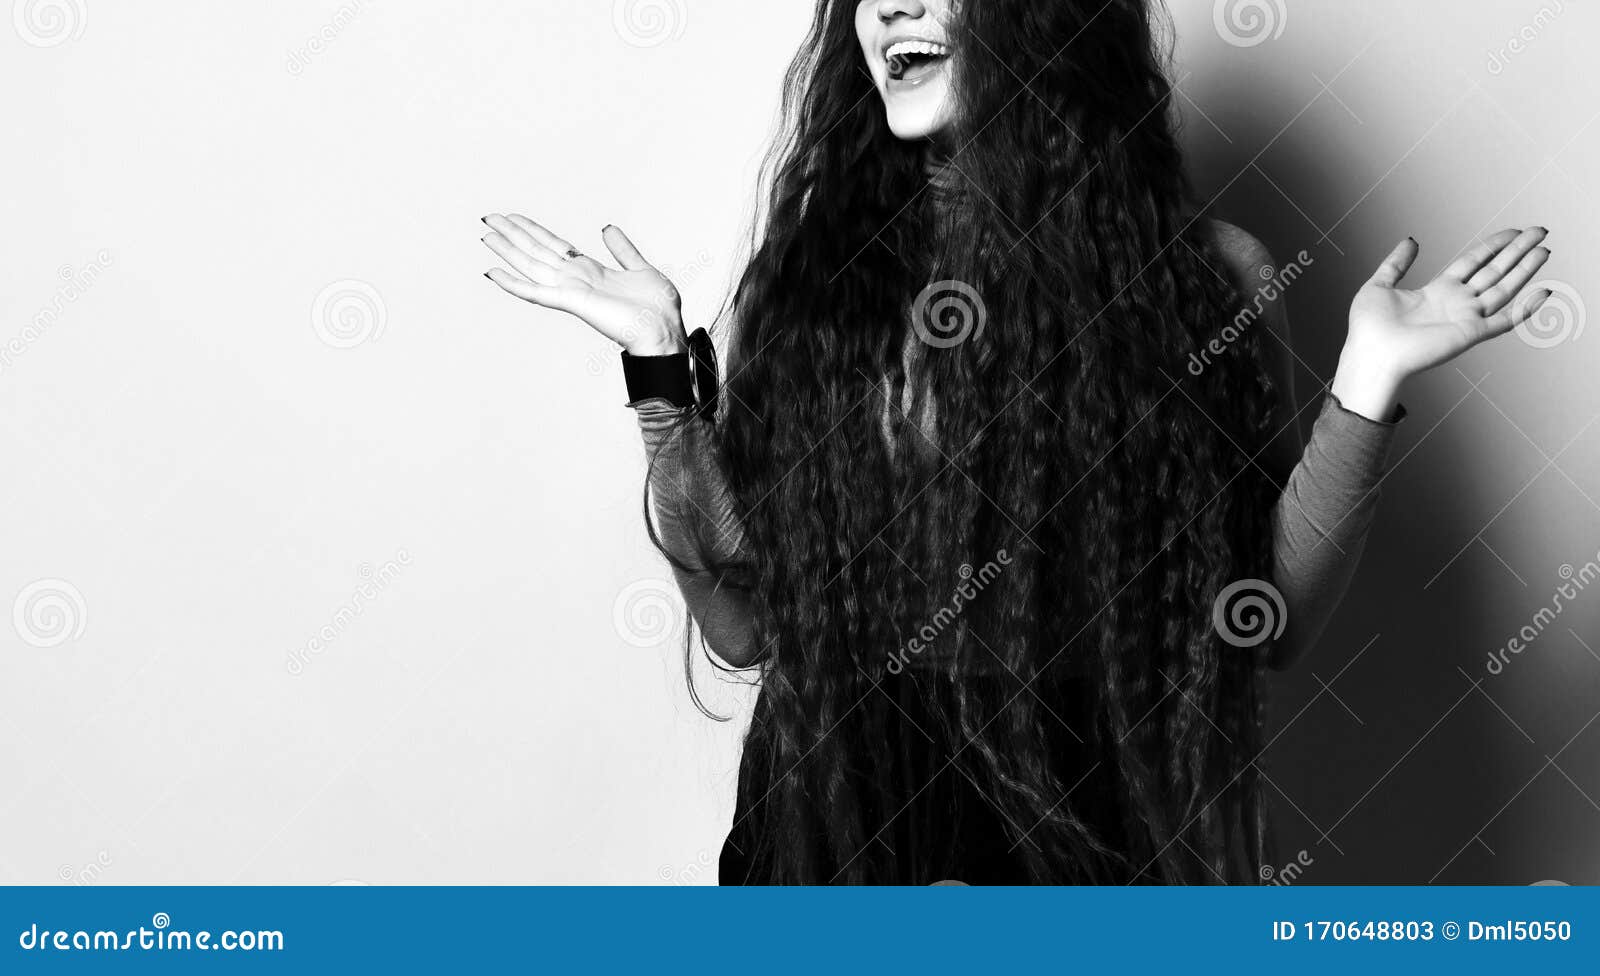 female with long hair in brown turtleneck, short skirt, nylon tights. laughing, gesticulating posing on beige background. close up